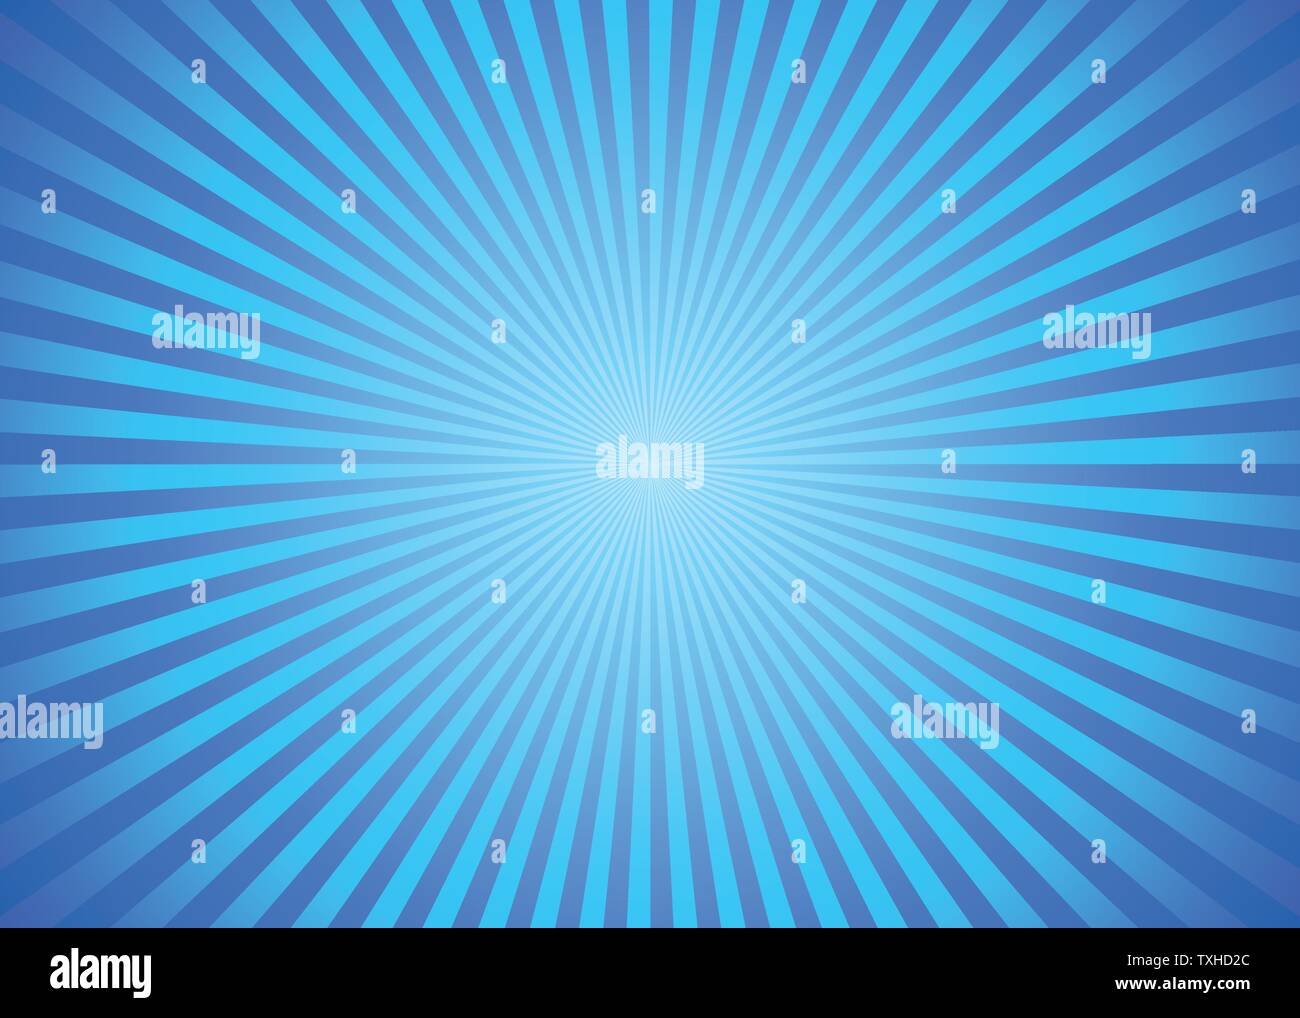 Sun ray background in blue color. Stock Vector